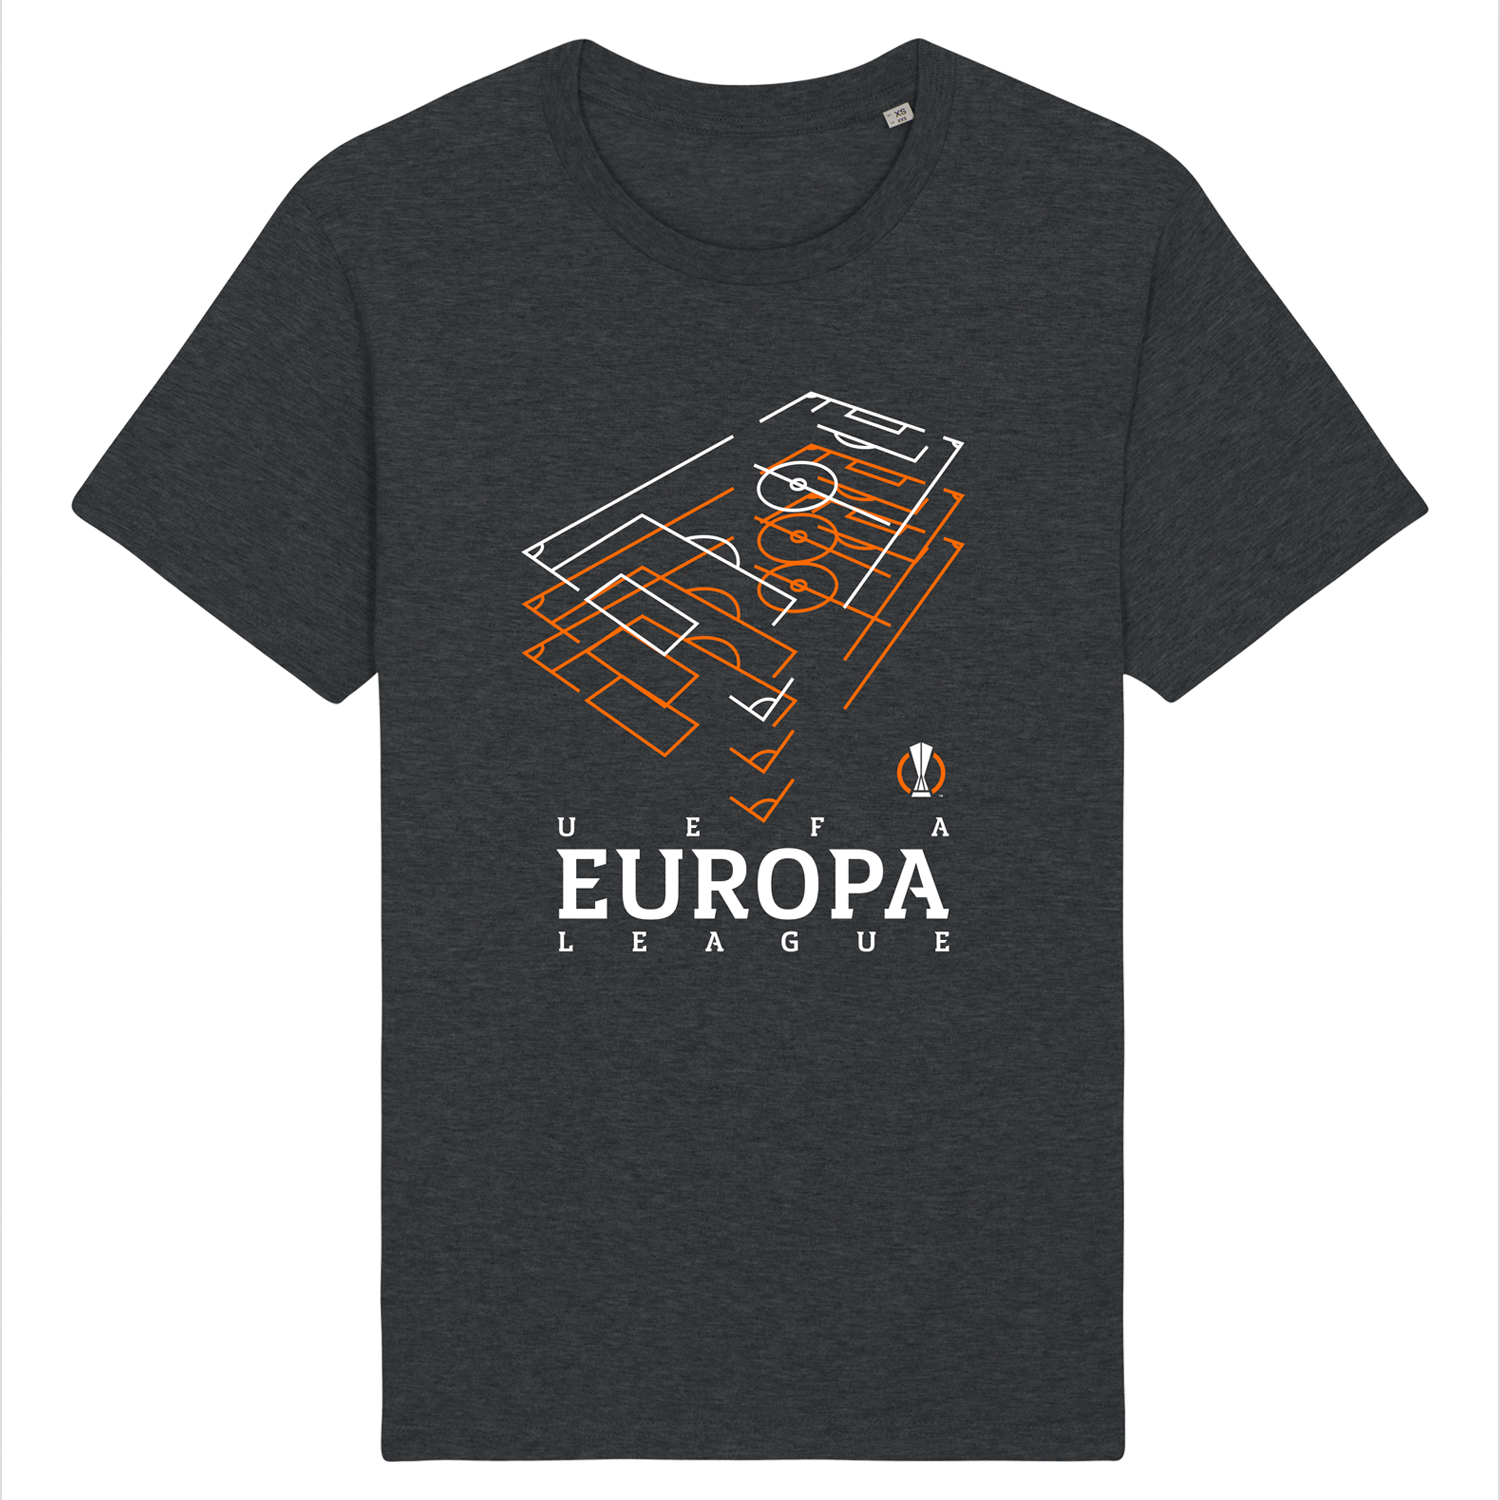 UEFA Europa League - Pitch Dark Grey T-Shirt UEFA Club Competitions Online Store